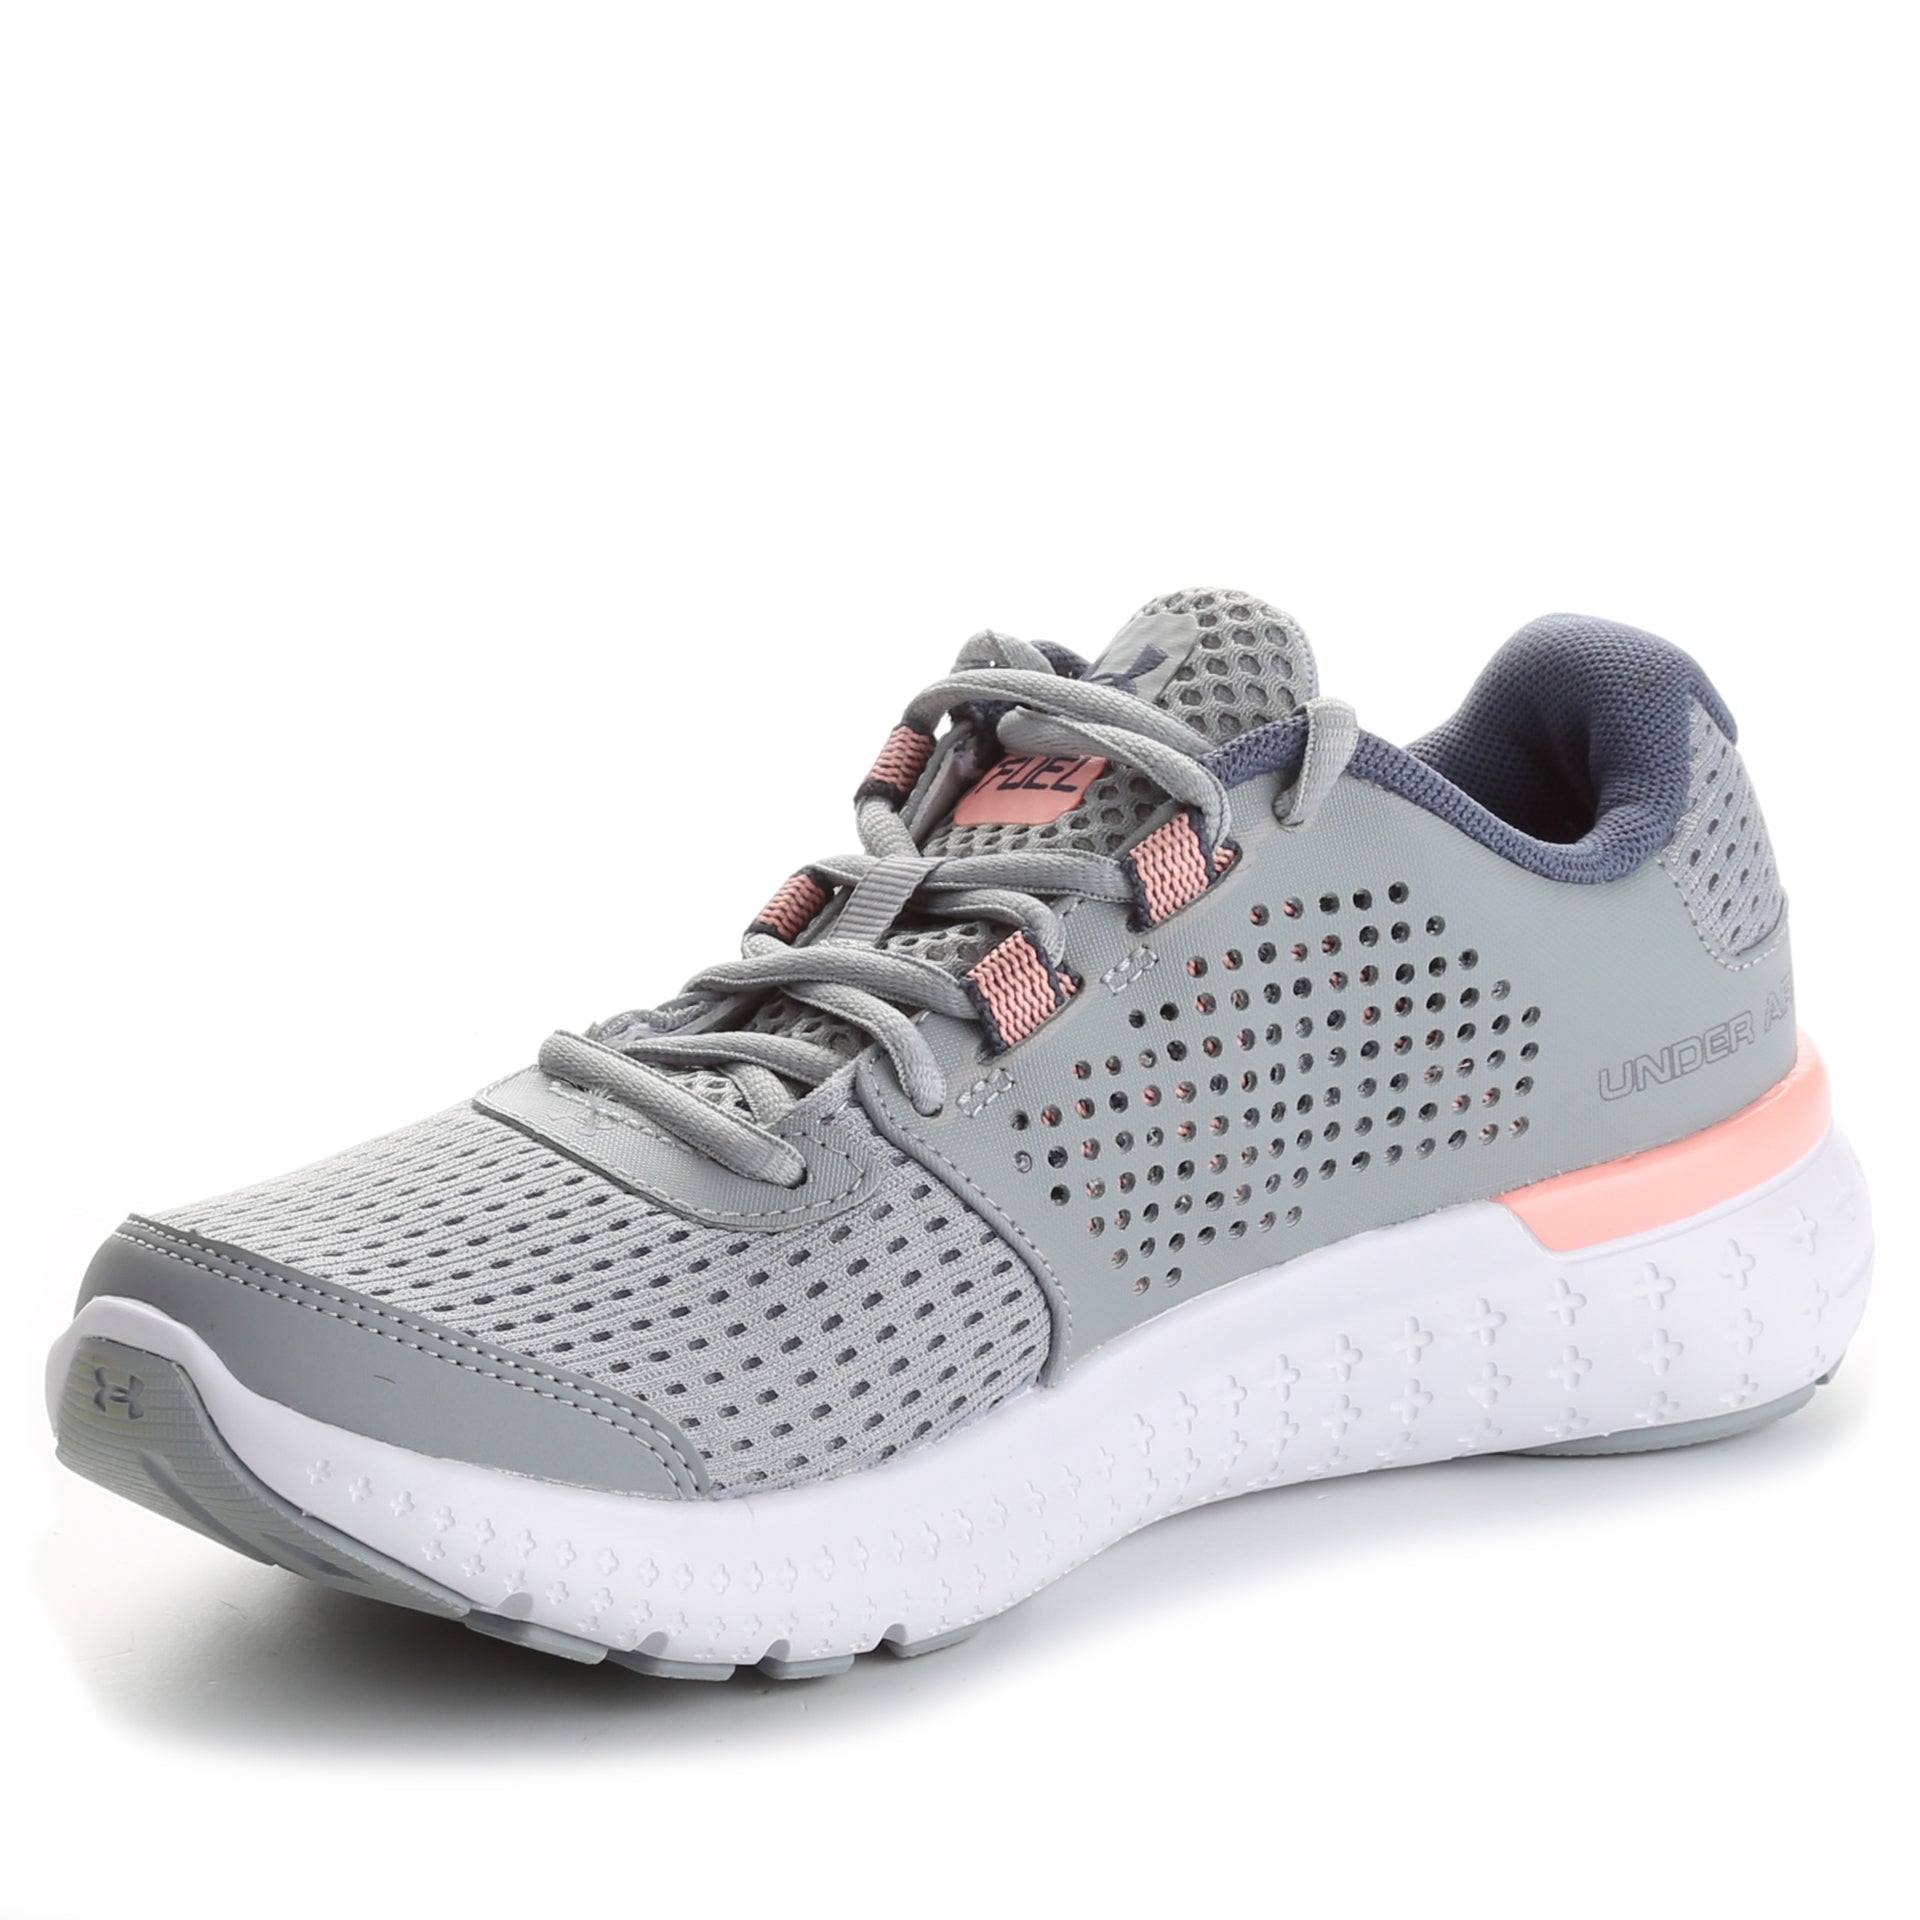 Under Armour Women's Micro G Fuel Running Shoes- Overcast Grey/Pink Sa -  New Star